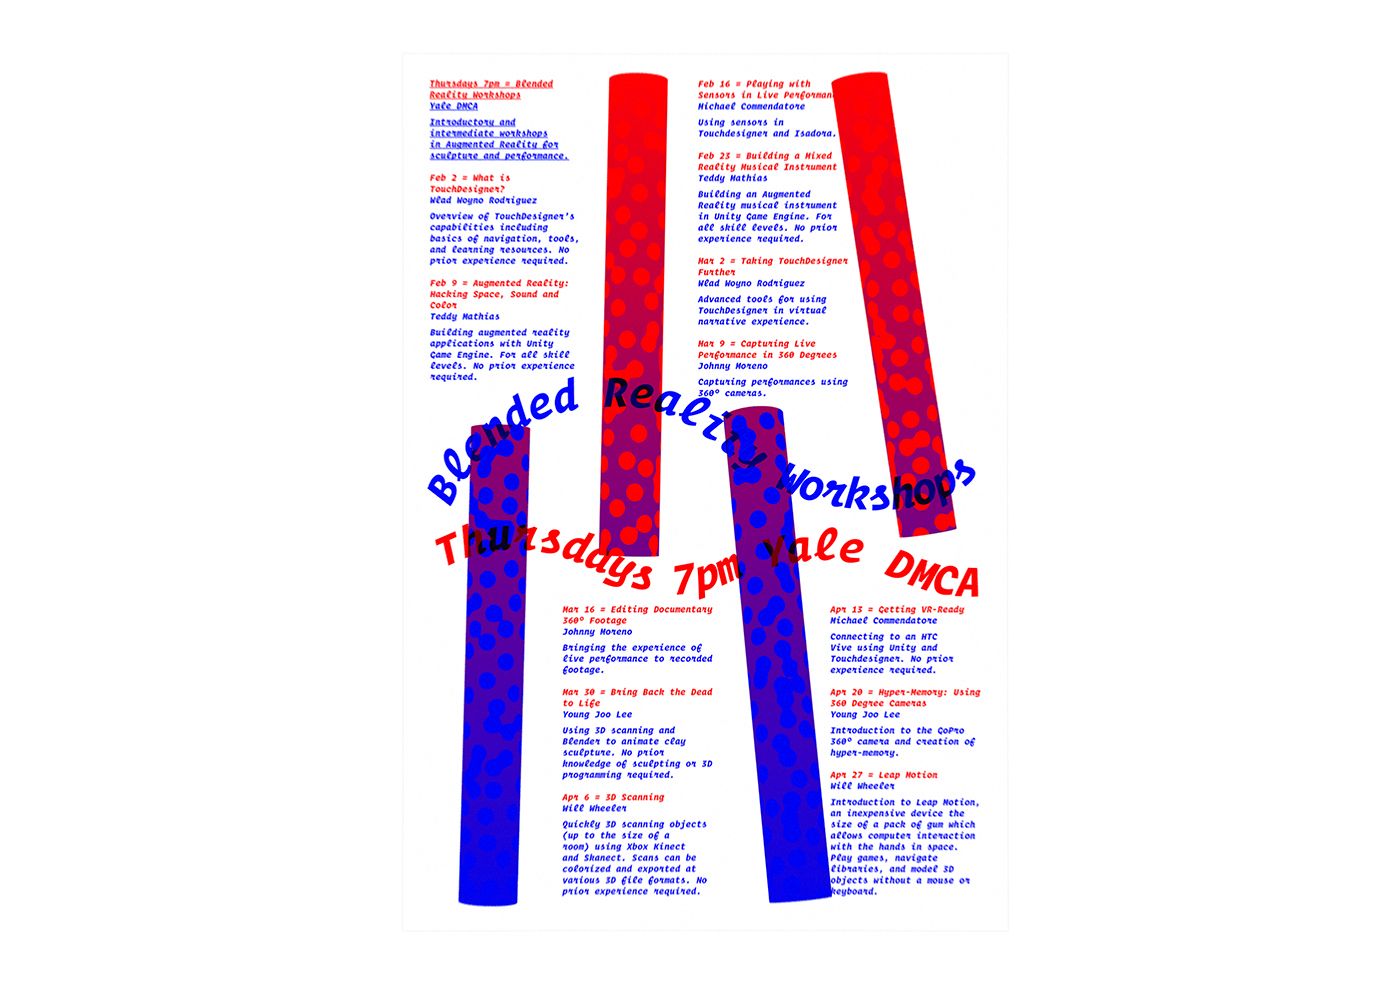 Modern red and blue geometric poster design for the Yale Digital Media Center for the Arts’ Blended Reality Workshops schedule